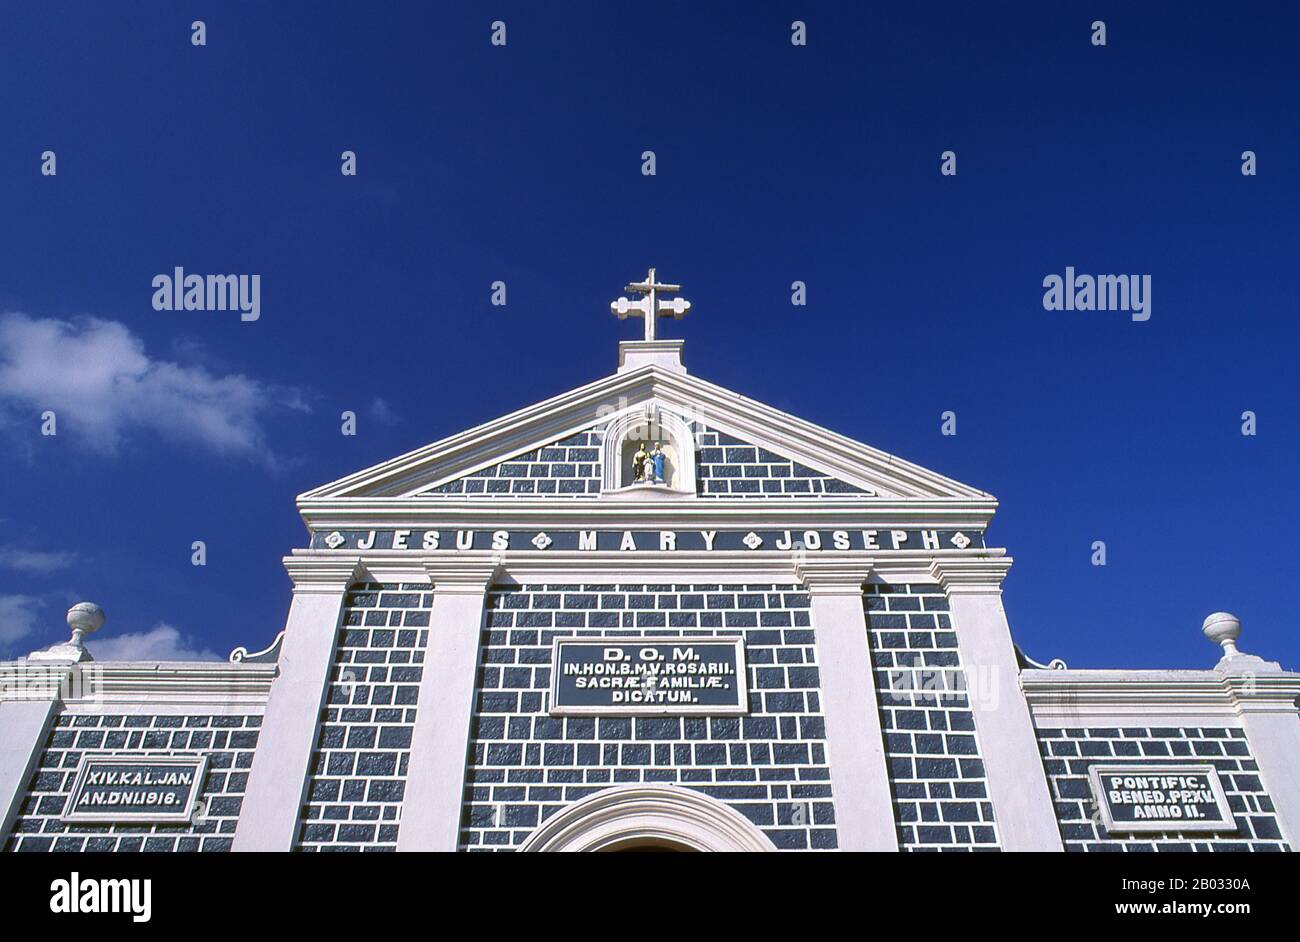 Originally built in 1916, the Holy Rosary Catholic Church was completely renovated in 2013.  Christianity, introduced to Sri Lanka by the Portuguese, is predominantly of the Roman Catholic variety and most visible along the west coast, especially around Negombo. Stock Photo